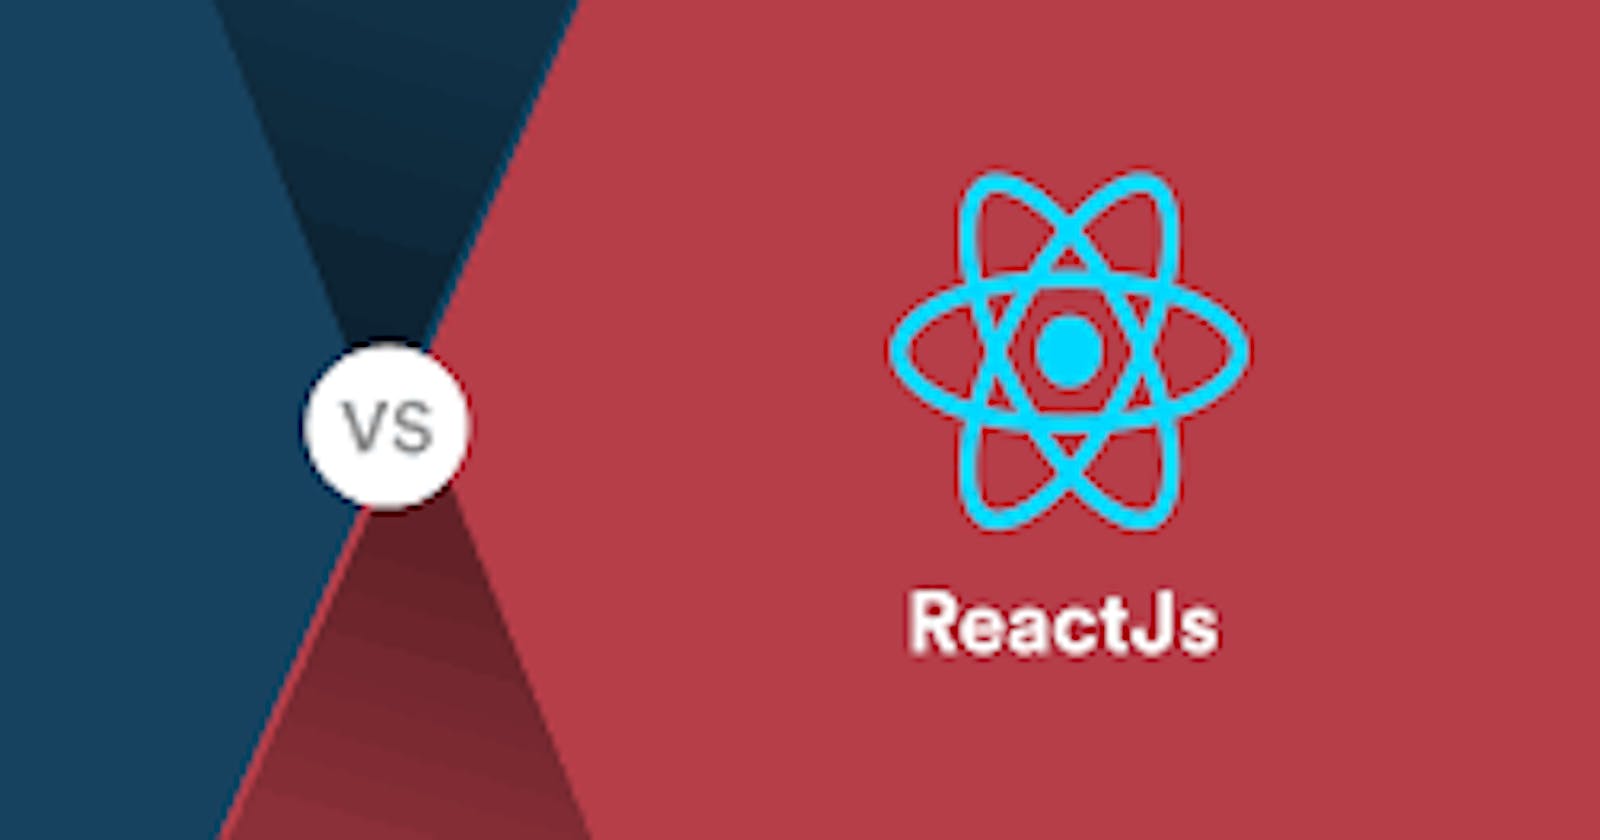 Who gets paid more, Angular or React developers?